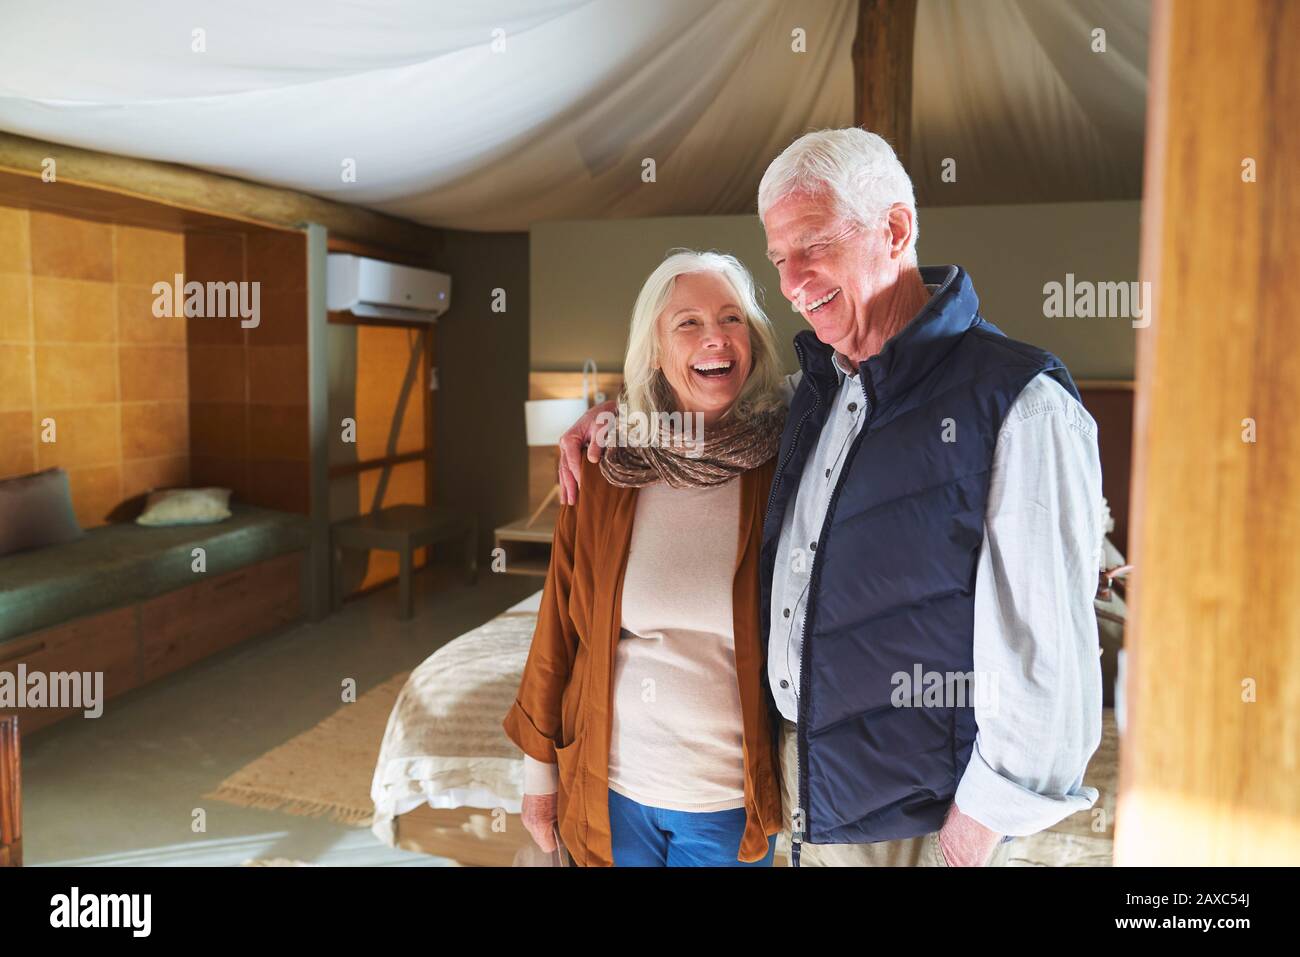 Happy senior couple laughing in hotel room Stock Photo